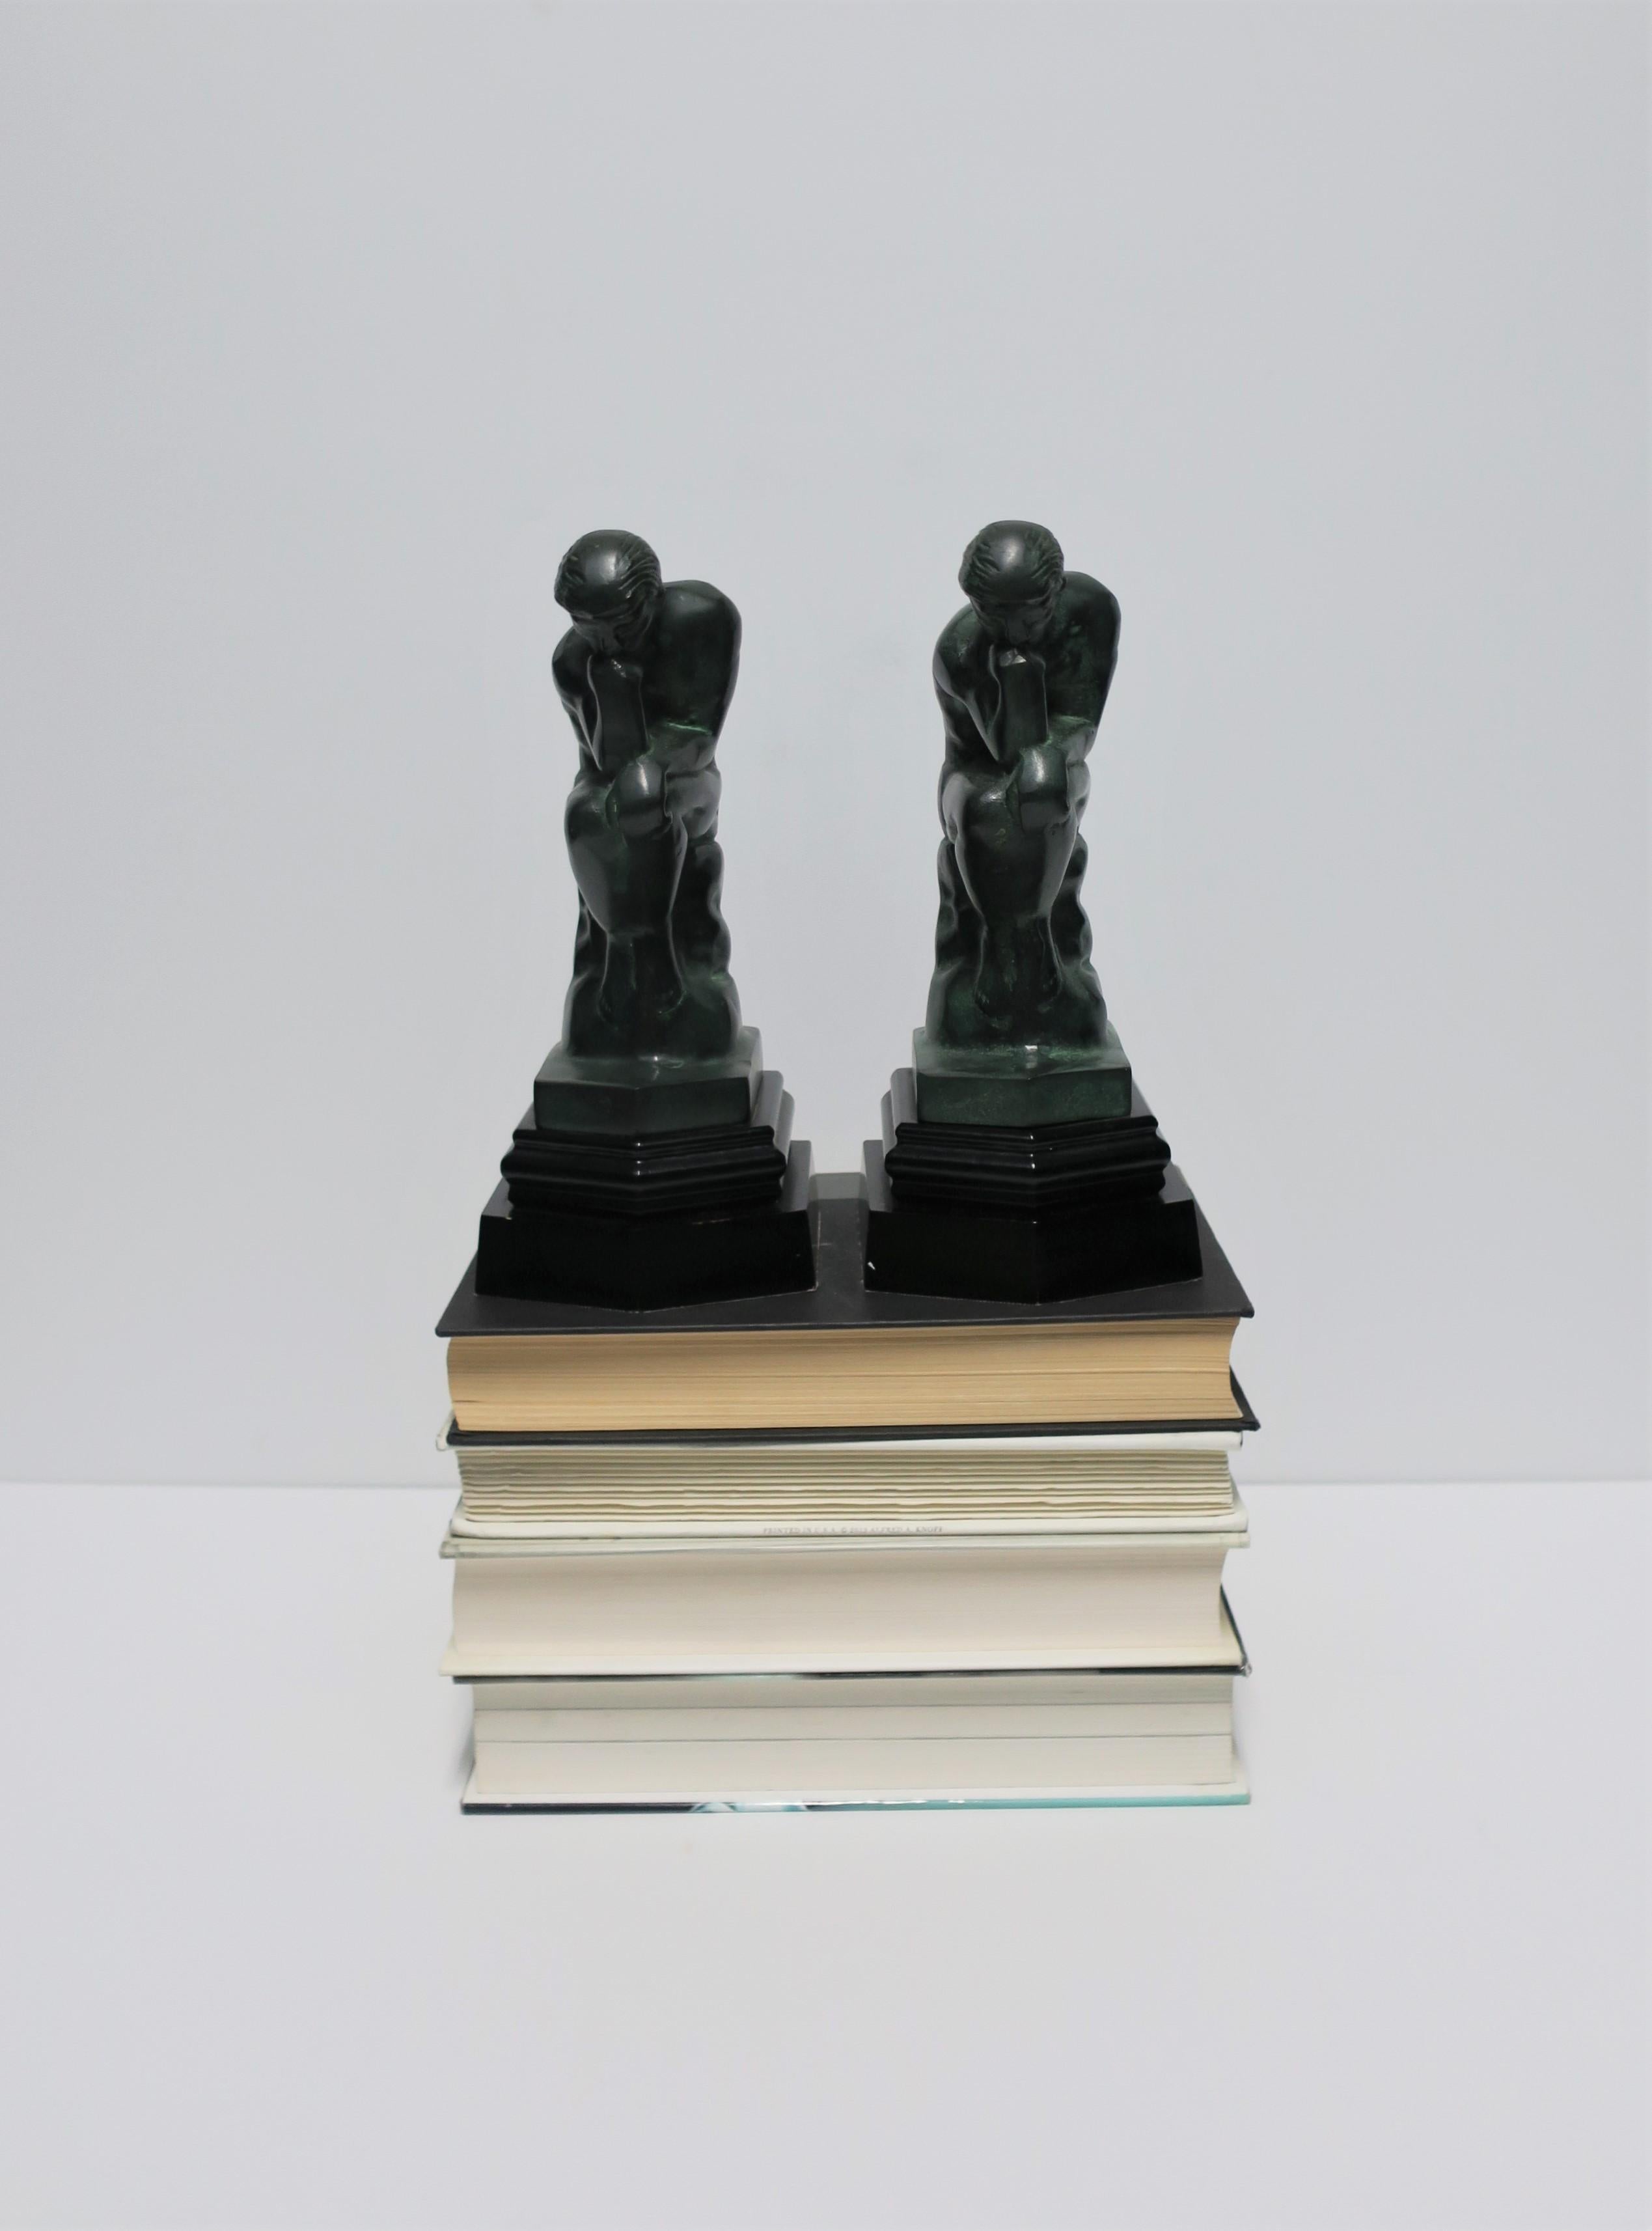 20th Century Black and Green Male Sculpture Bookends, Pair